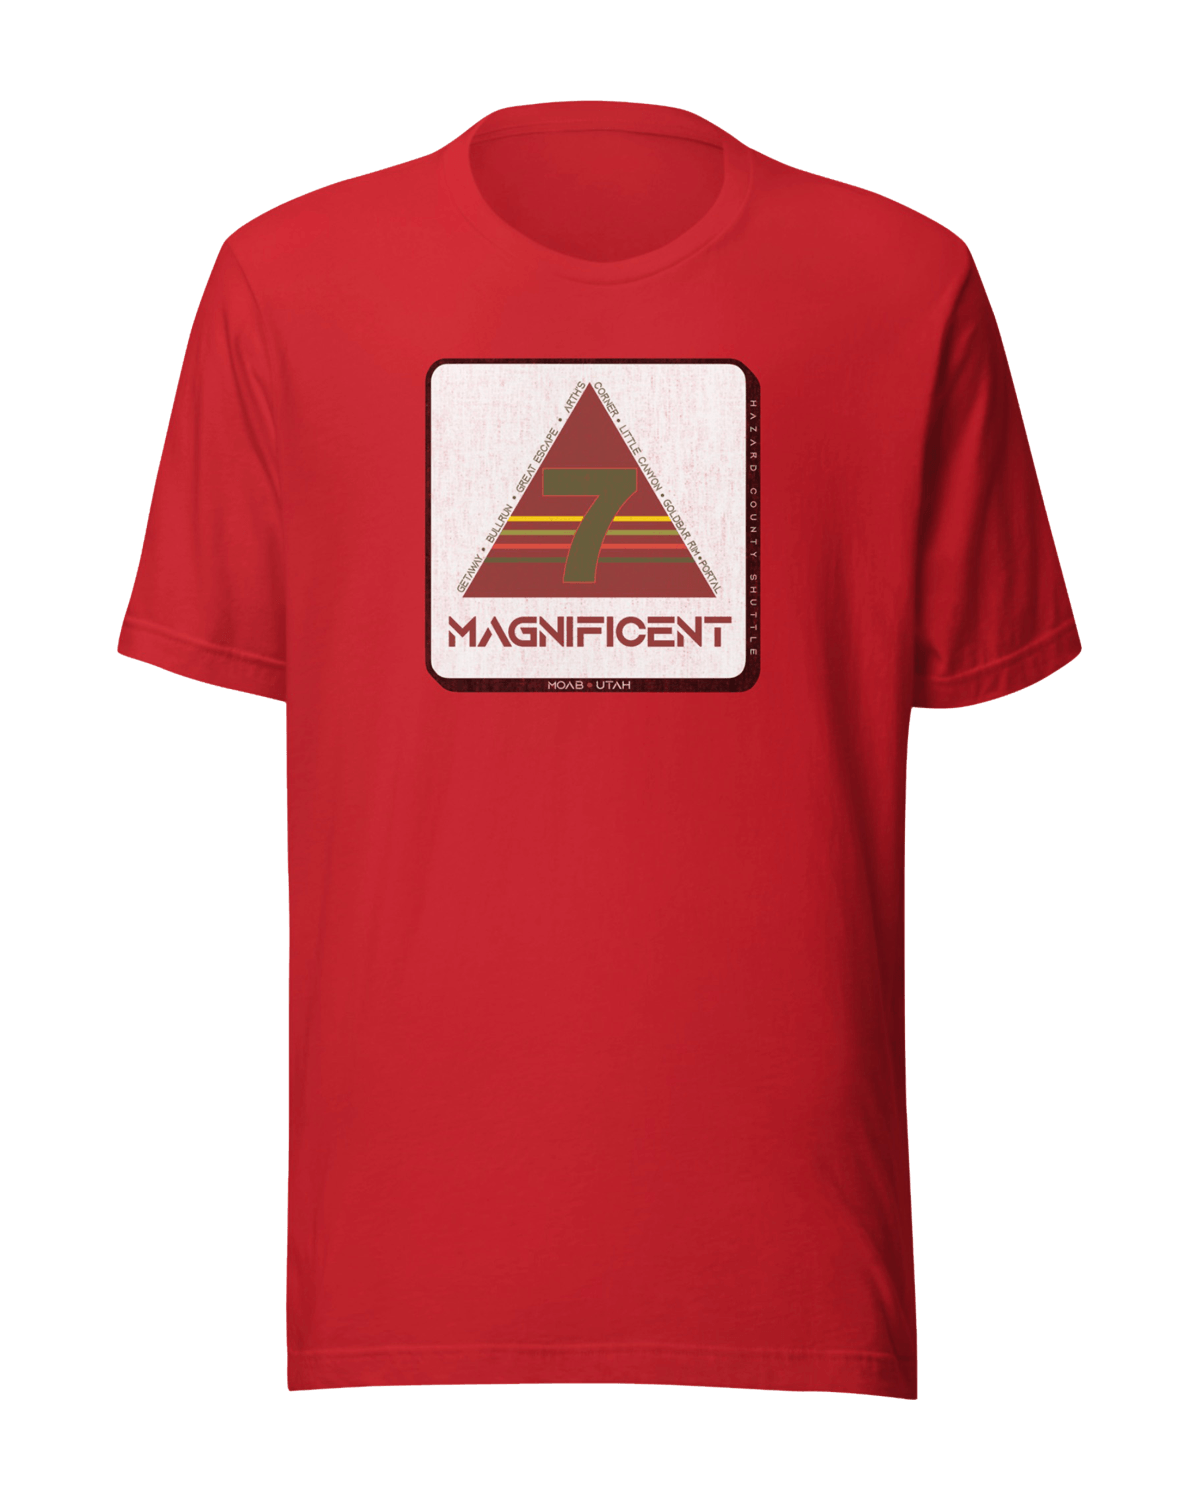 Magnificent 7 Graphic T-Shirt